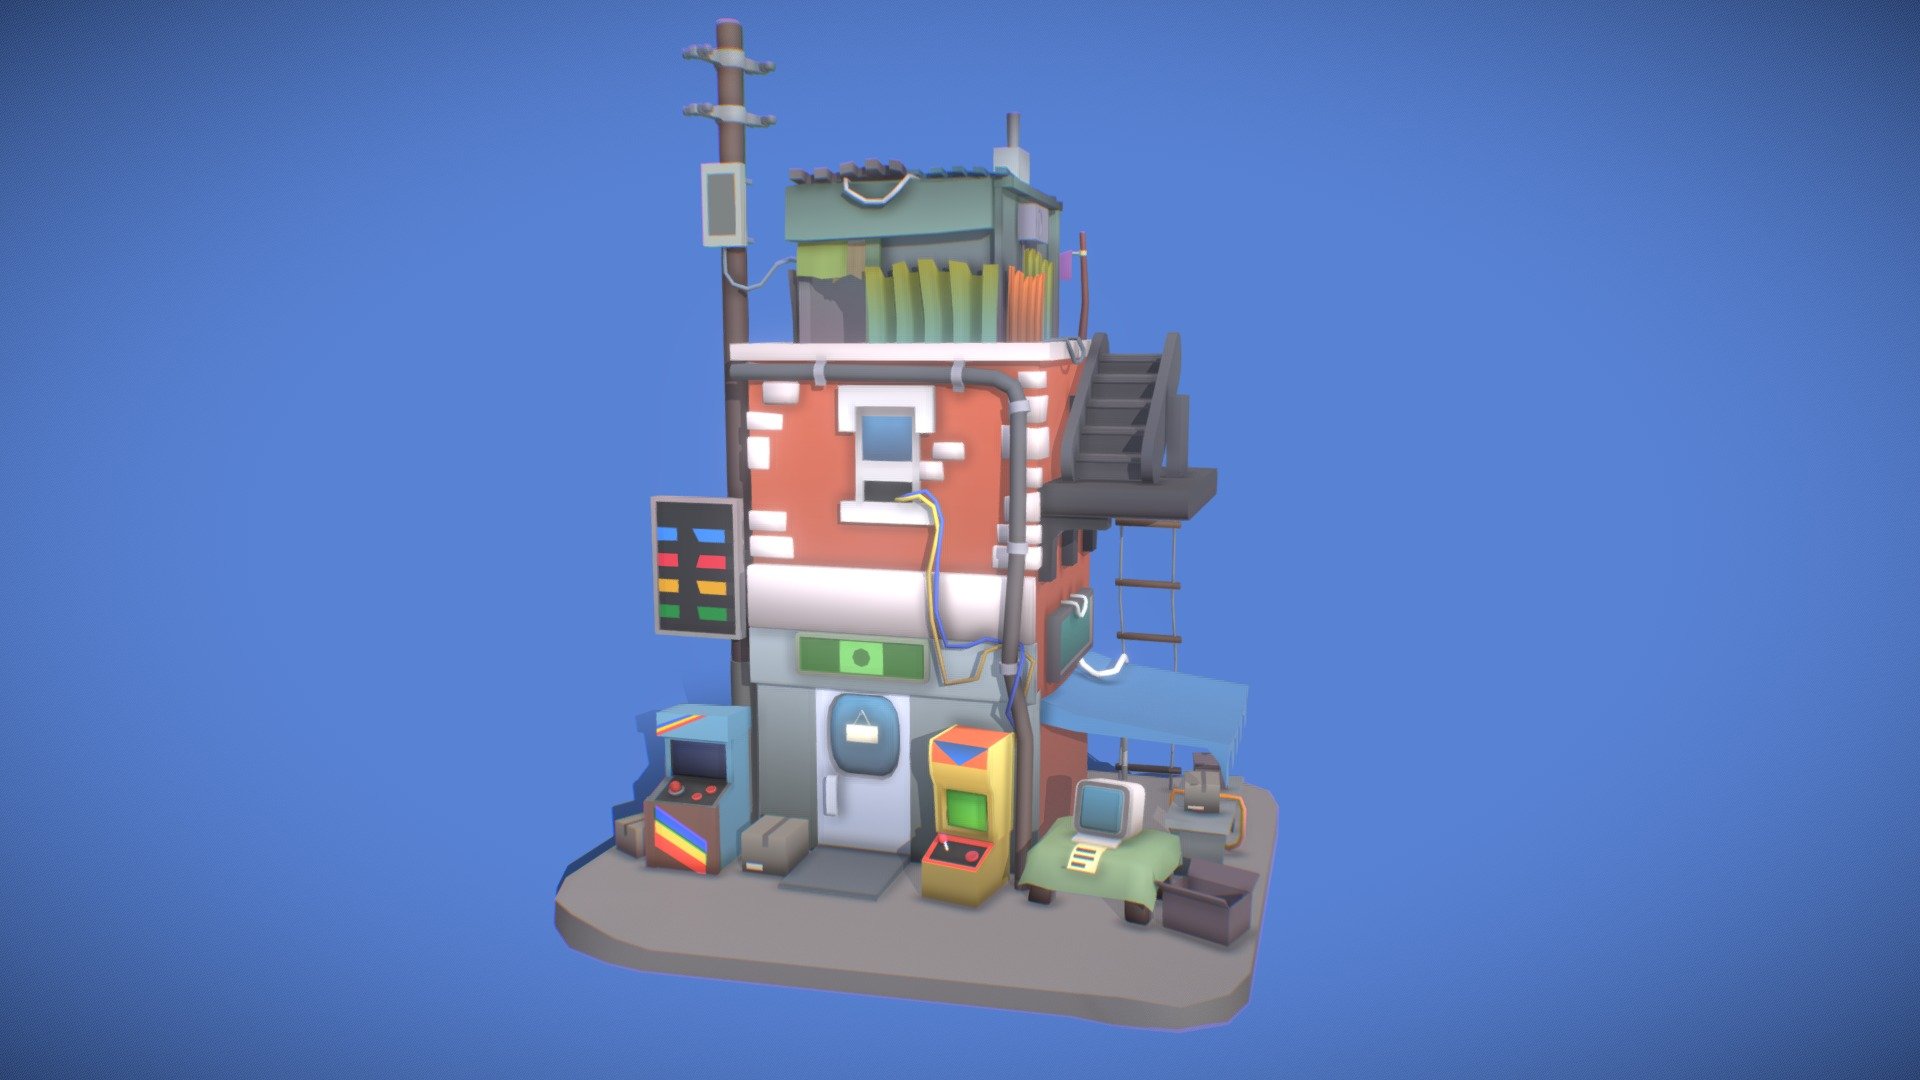 Lowpoly cartoon building 
Game props made on blender
Ready for UNITY or UNREAL games 3d model